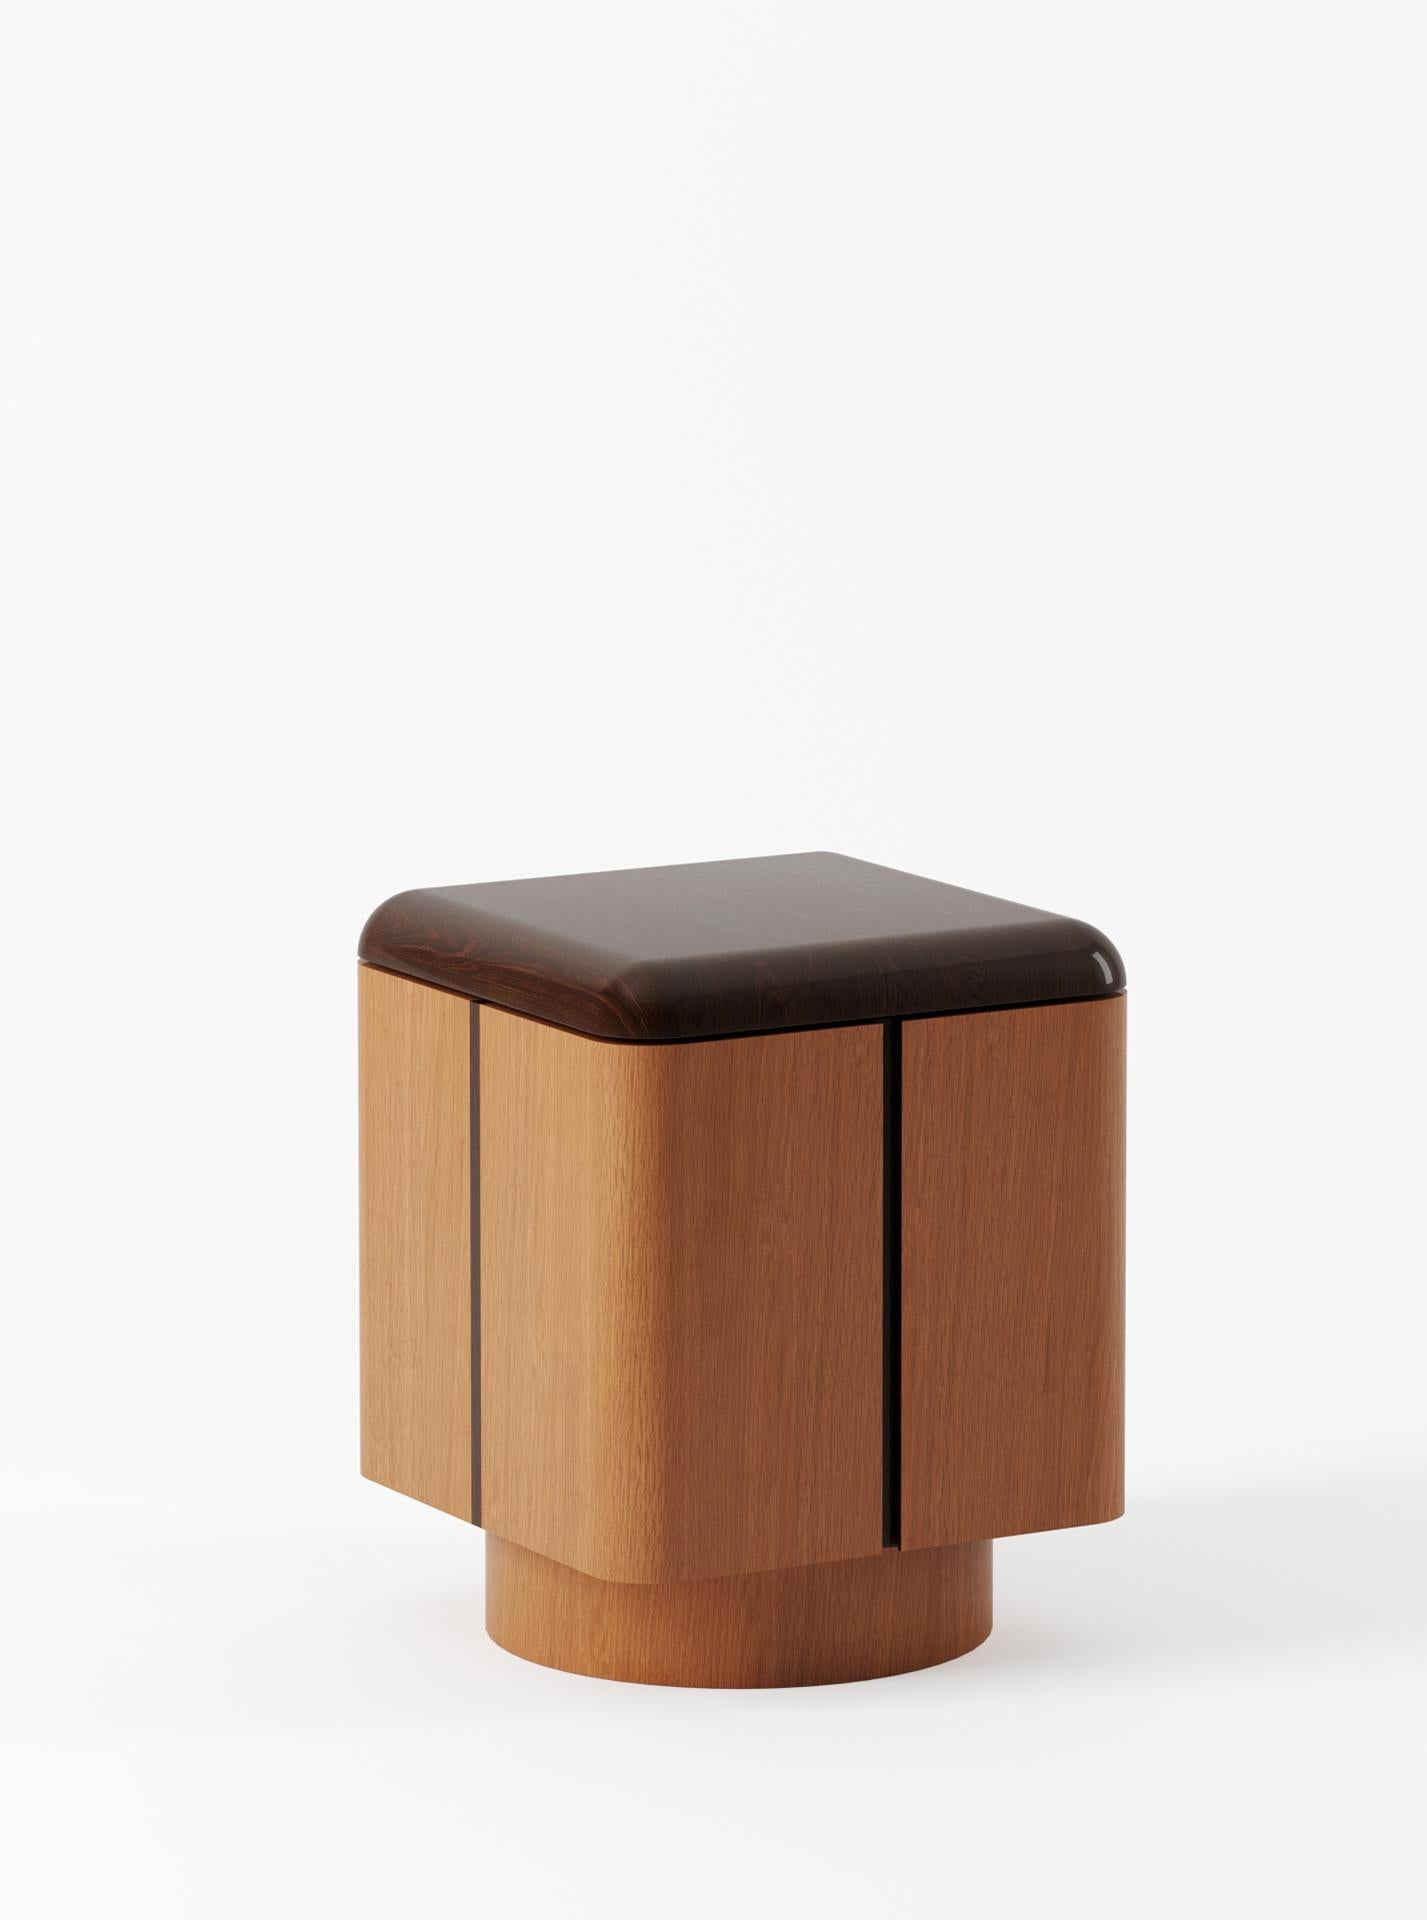 Minimalist Various Positions Nightstand in Walnut and Oak by Master Studio for Lemon For Sale